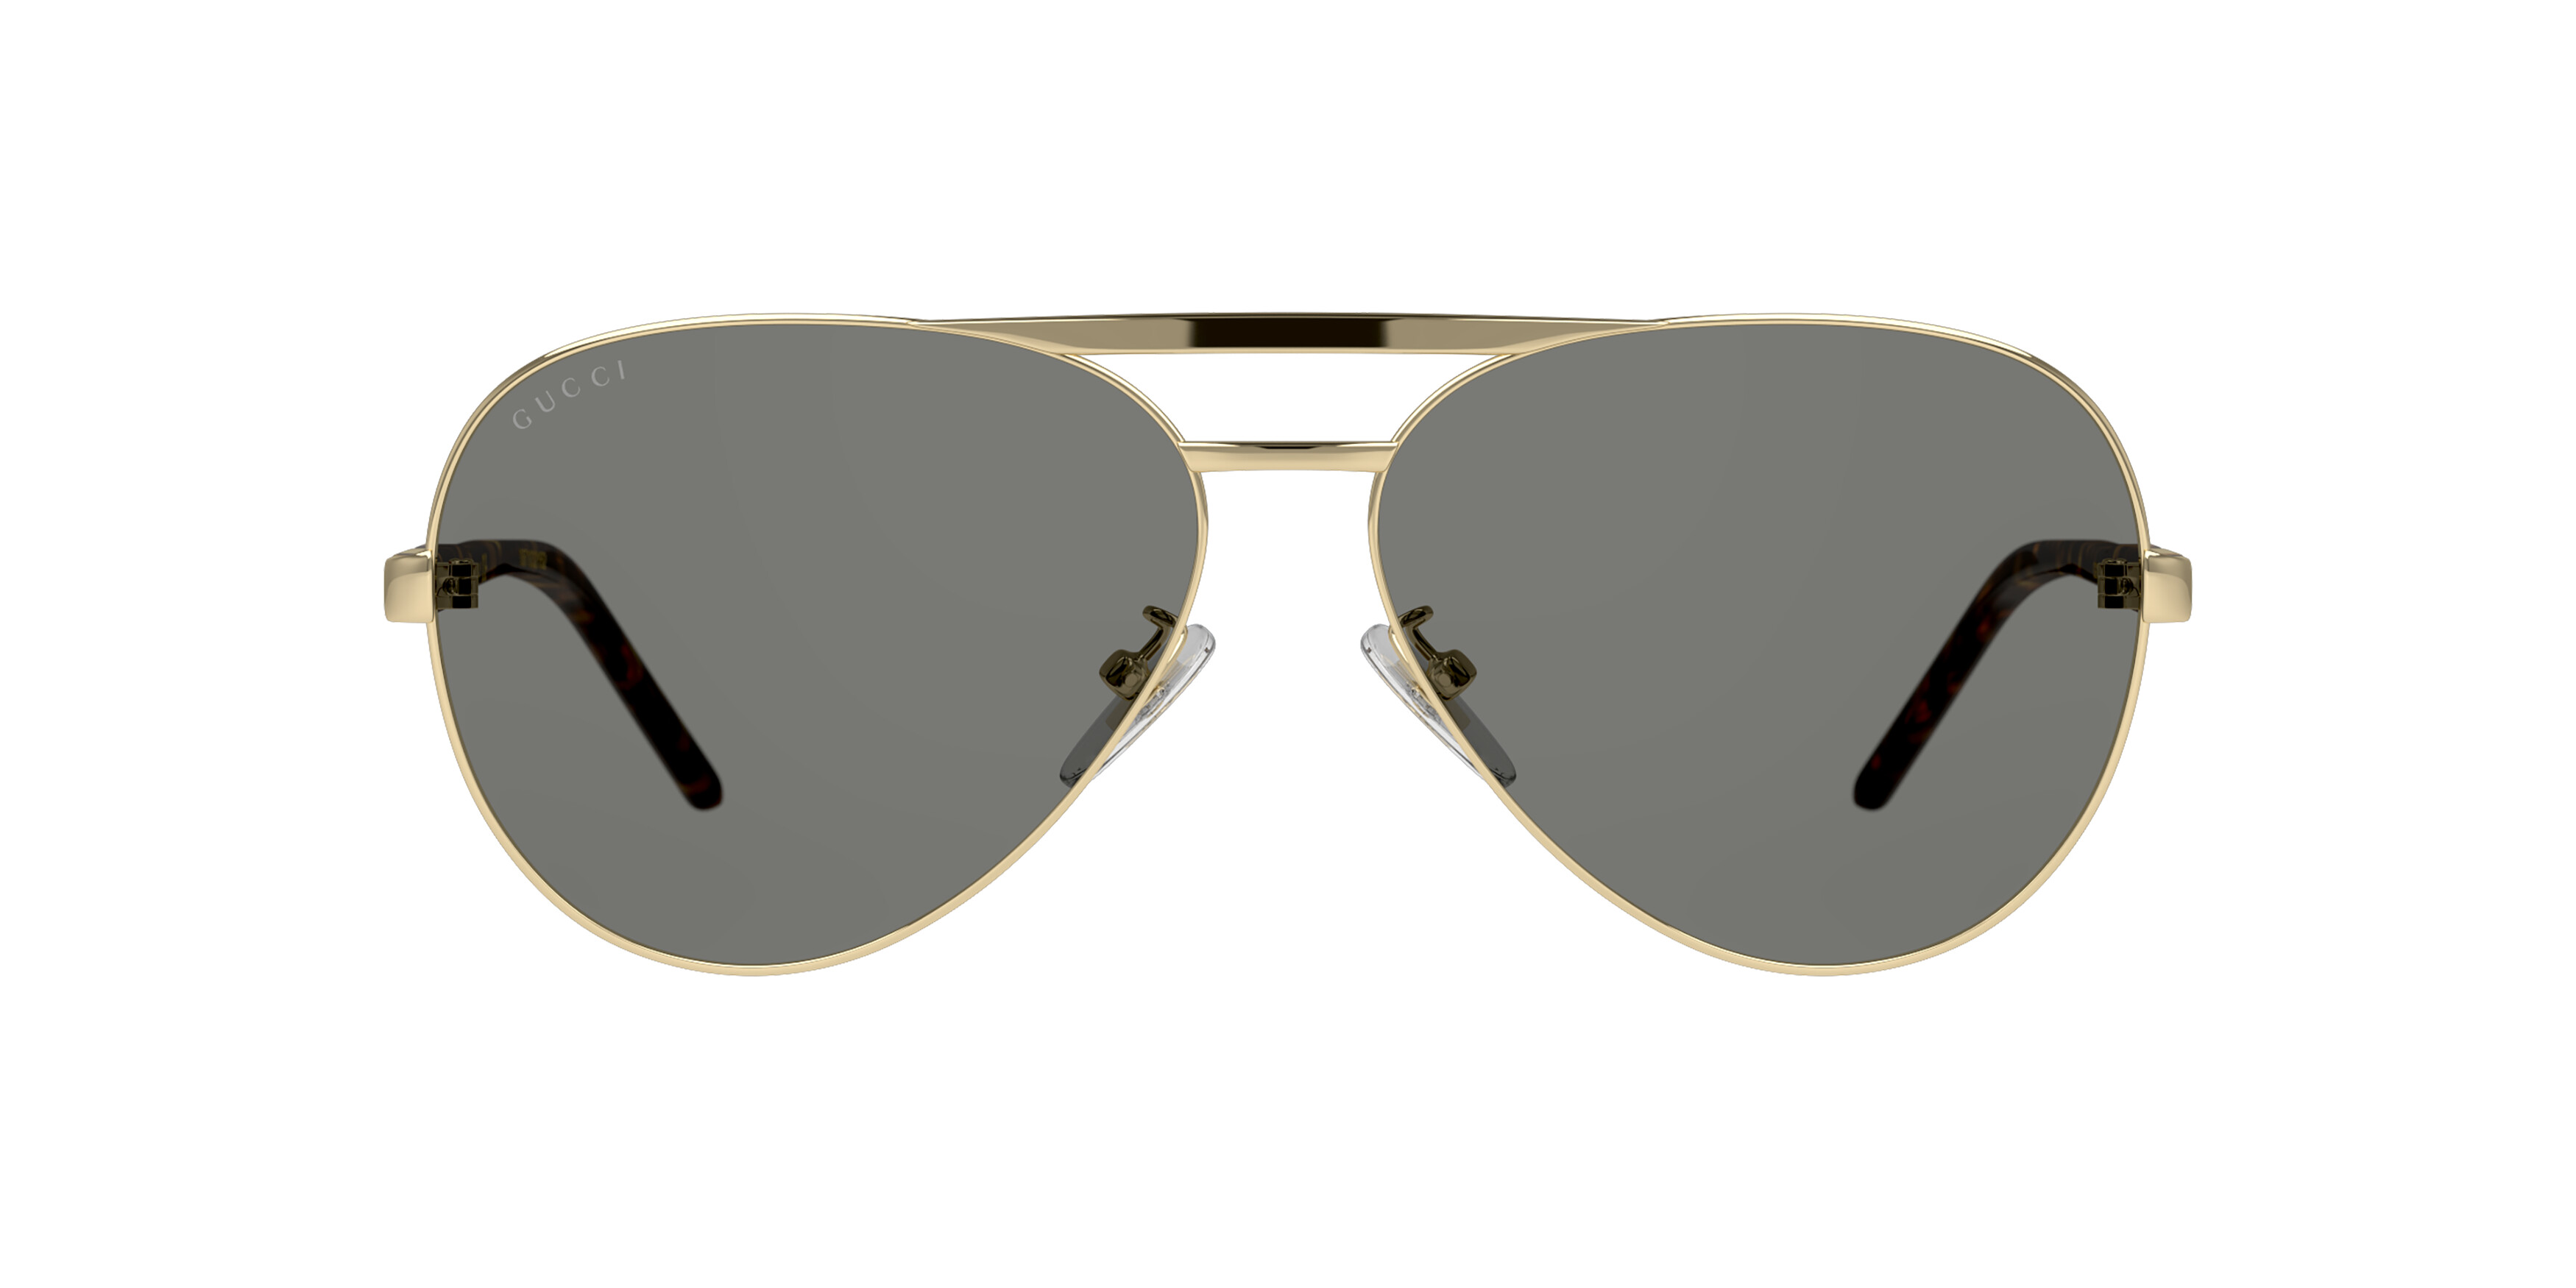 [products.image.front] Gucci GG1163S 001 Sonnenbrille